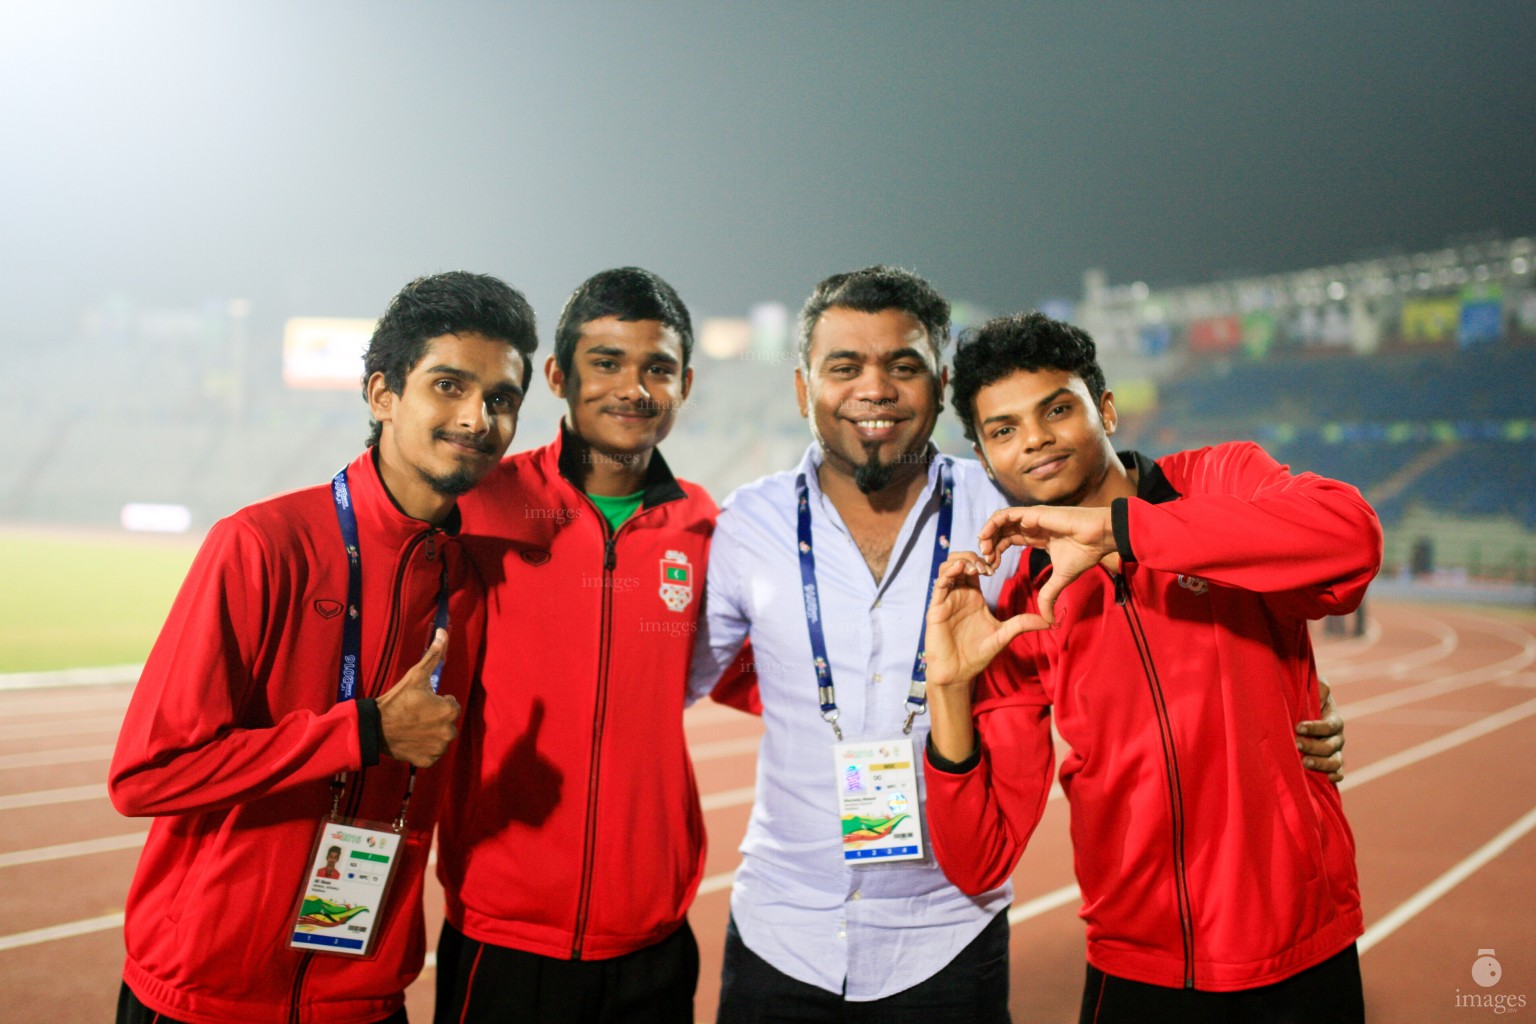 Hassan Saaid wins Silver medal in the 200m finals in the South Asian Games in Guwahati, India, Thursday, February. 11, 2016. (Images.mv Photo/ Mohamed Ahsan).